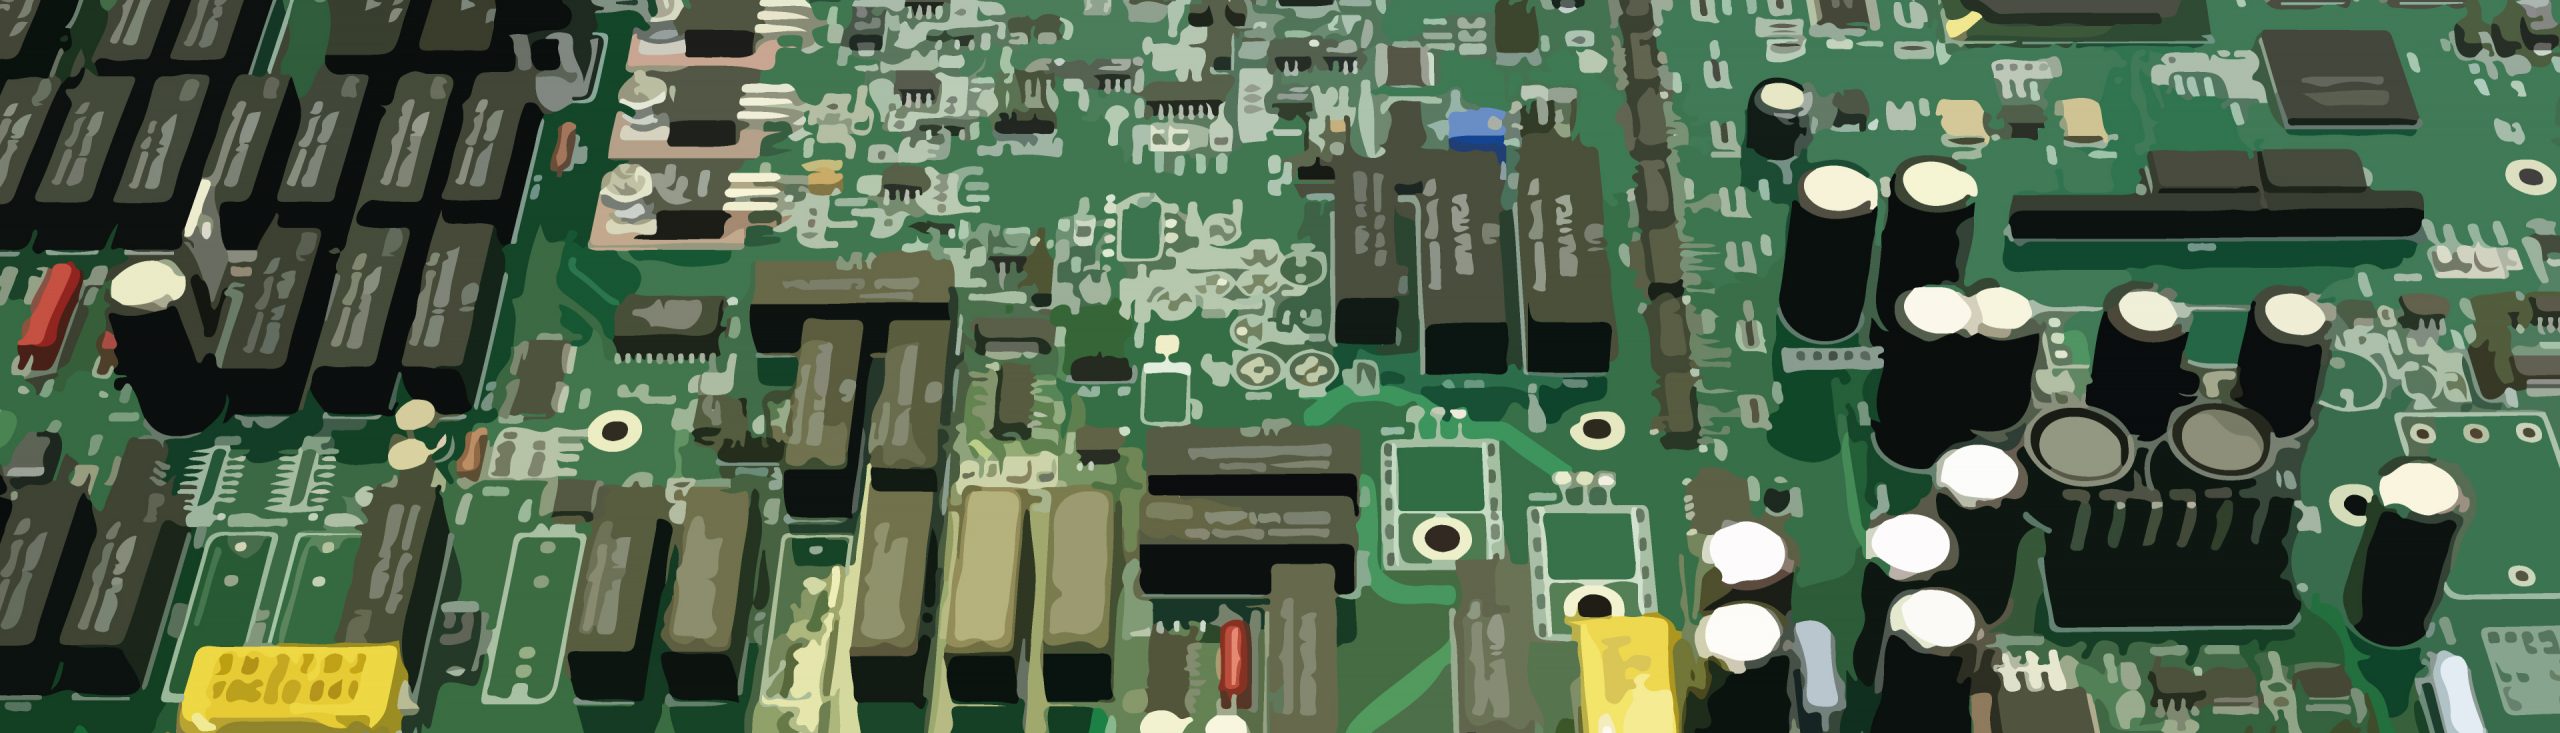 Give Yourself the Best Chance of Getting Your PCB Design Right First Time!